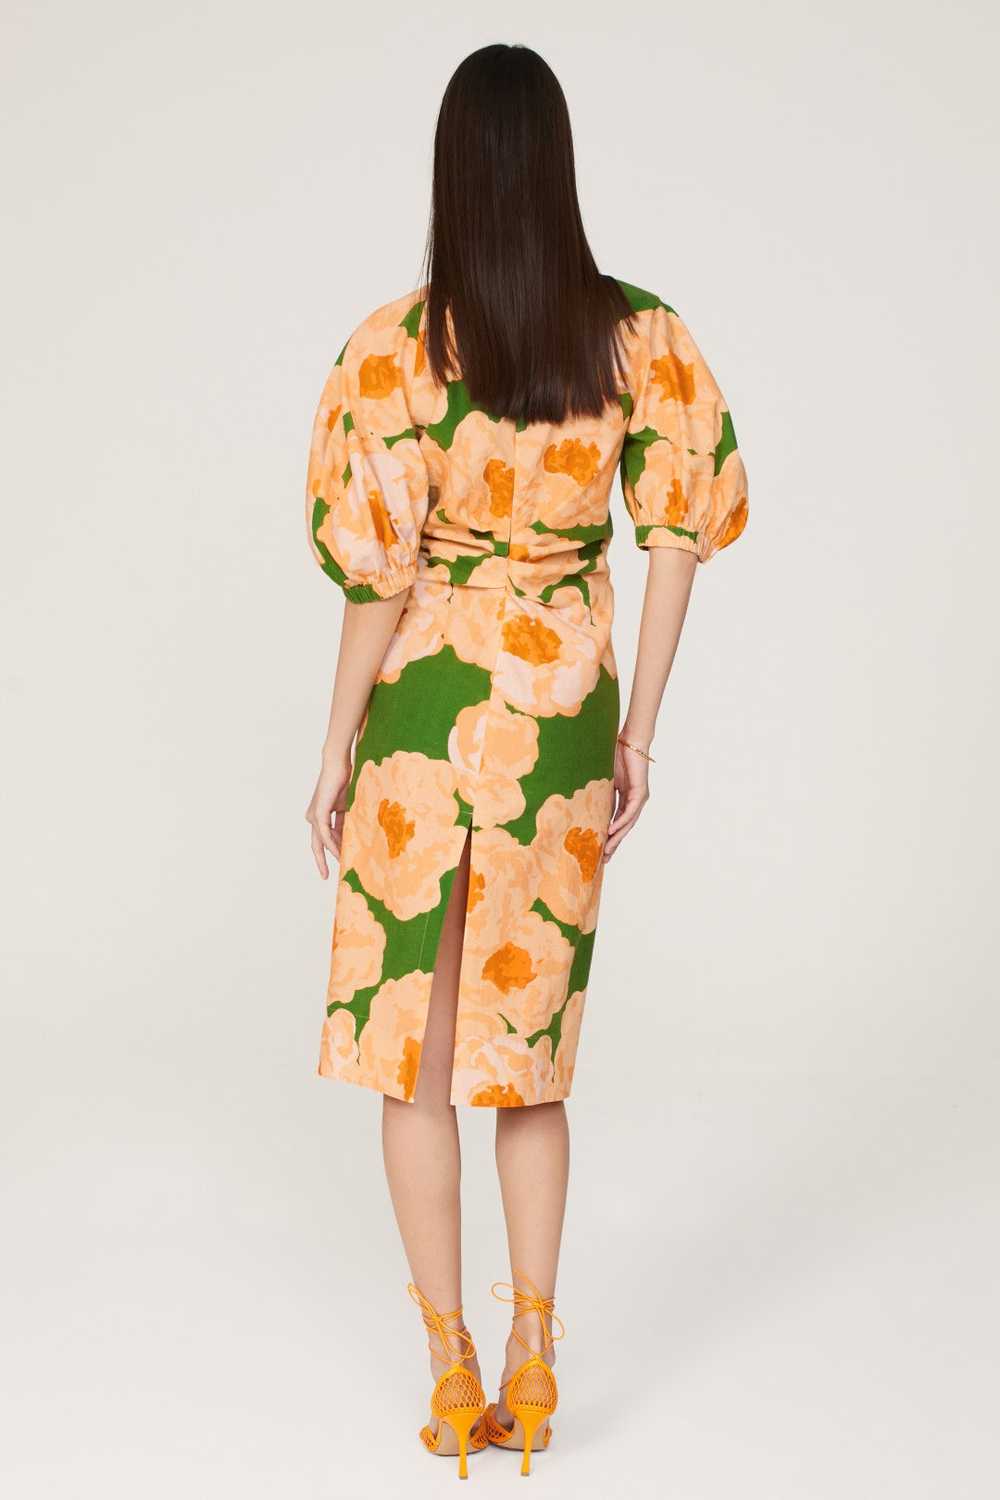 Eudon Choi Collective Puff Sleeve Dress - image 3